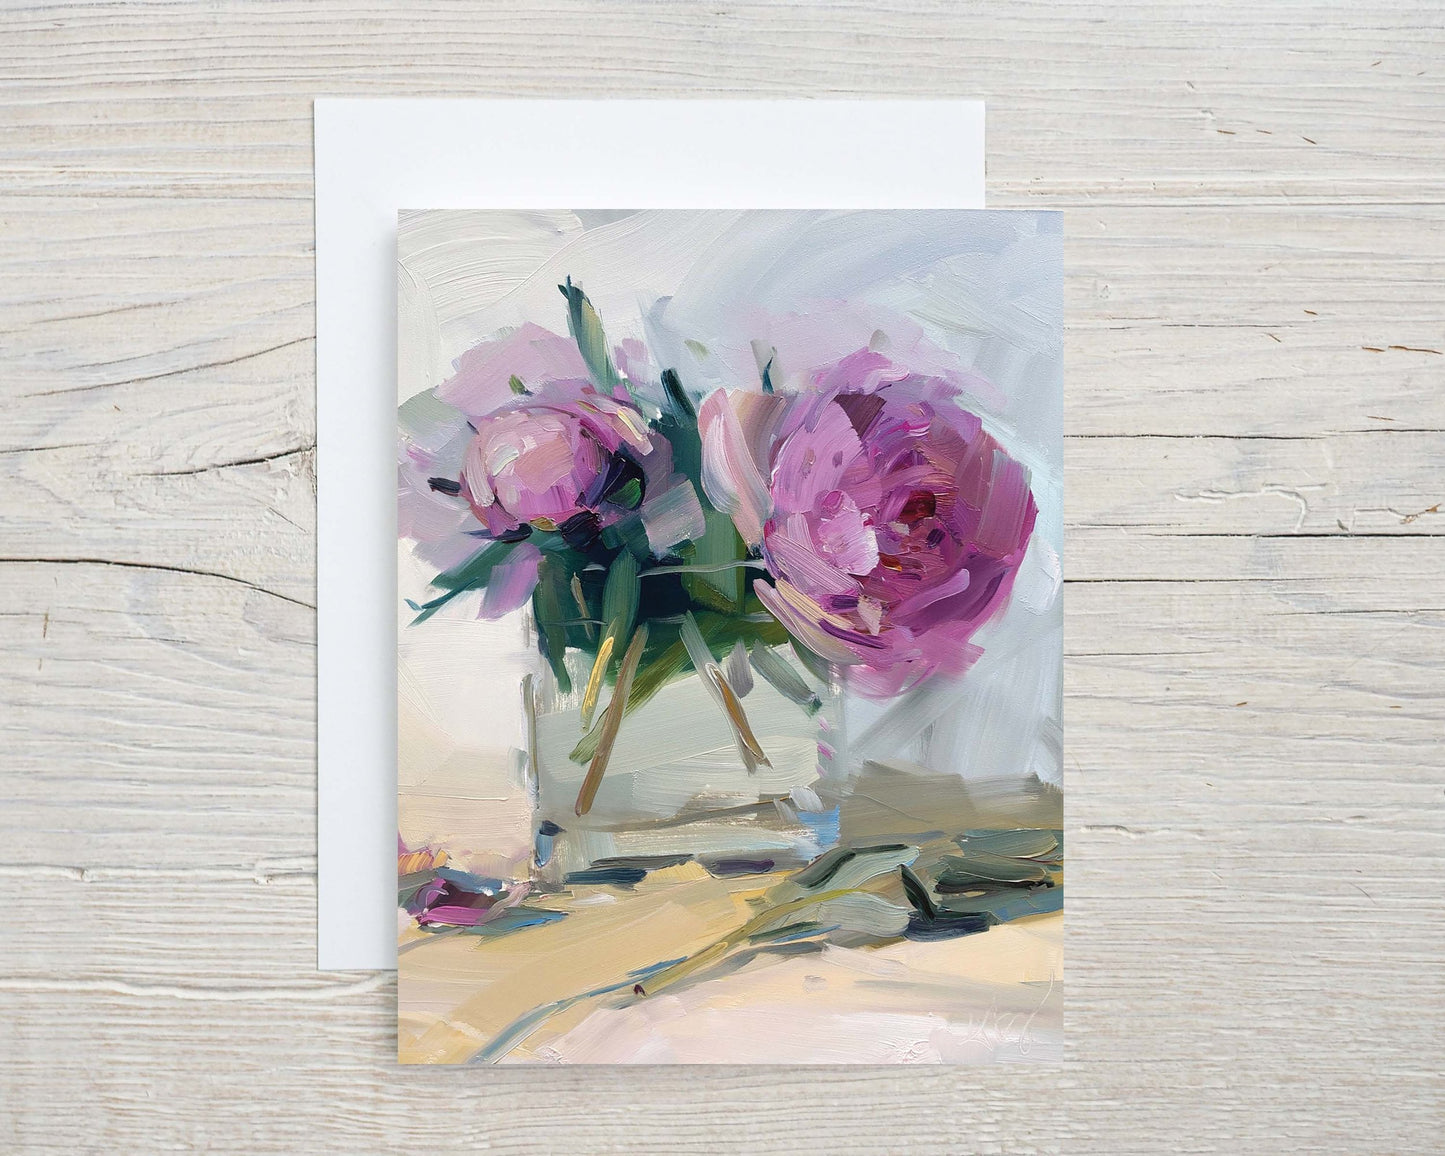 Three Peonies, Note Card Set, 8 cards and envelopes